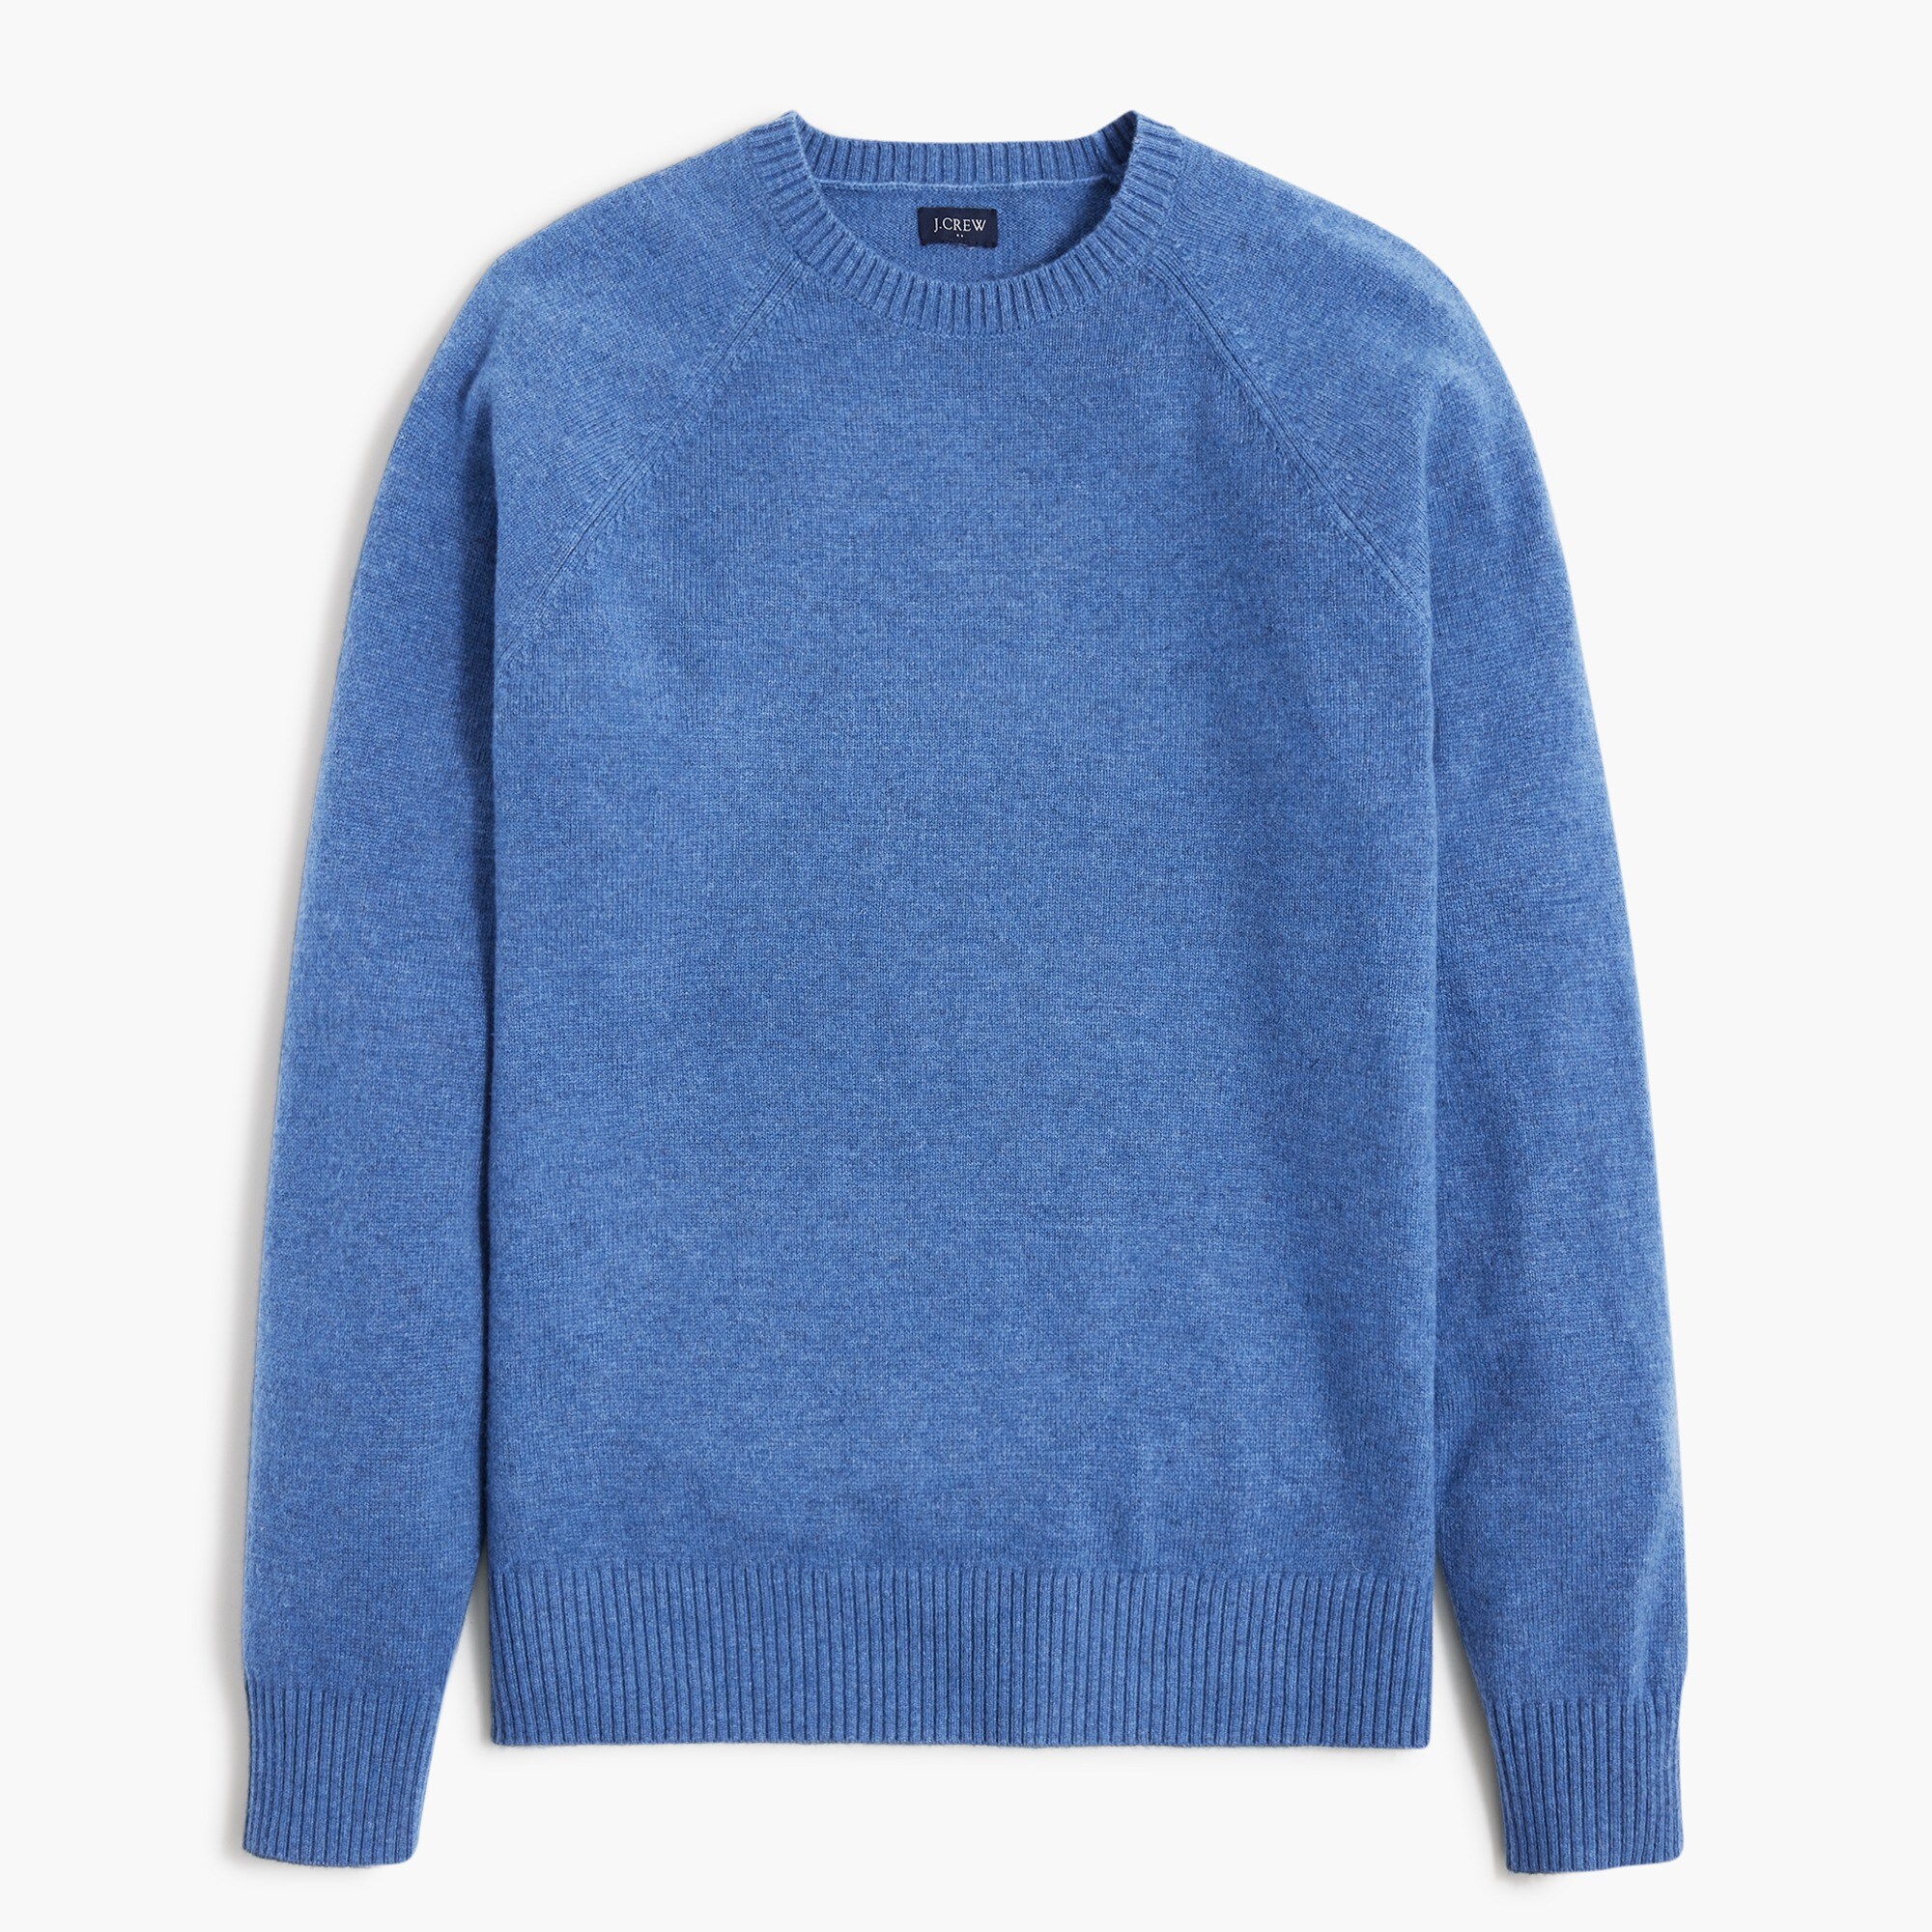  Crewneck sweater in supersoft lambswool blend